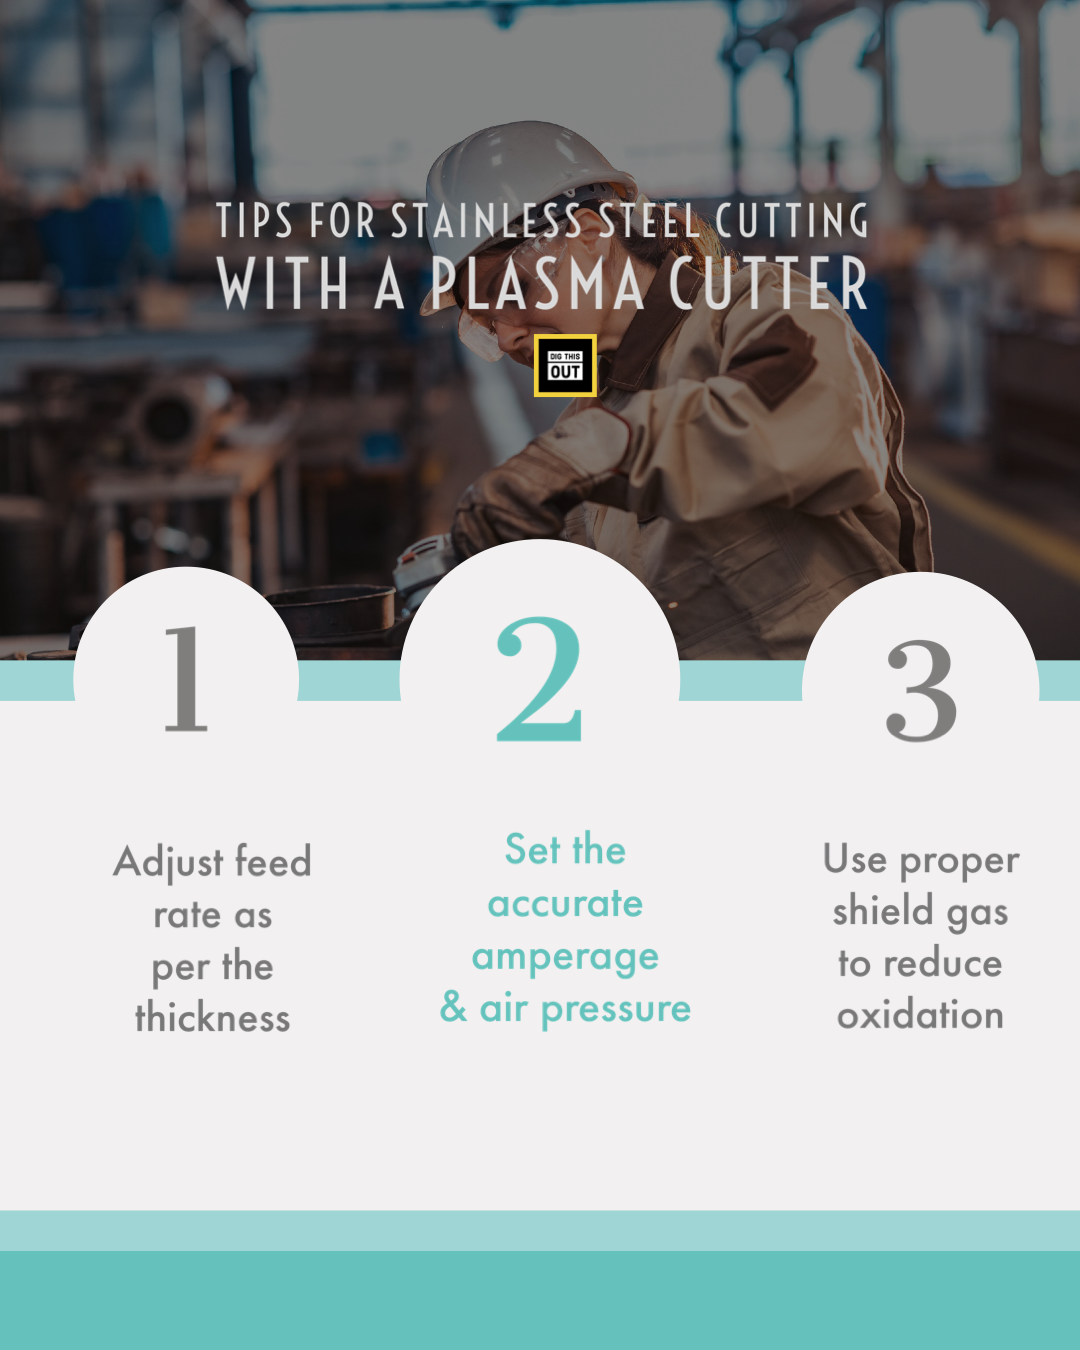 Tips for stainless steel cutting with a plasma cutter